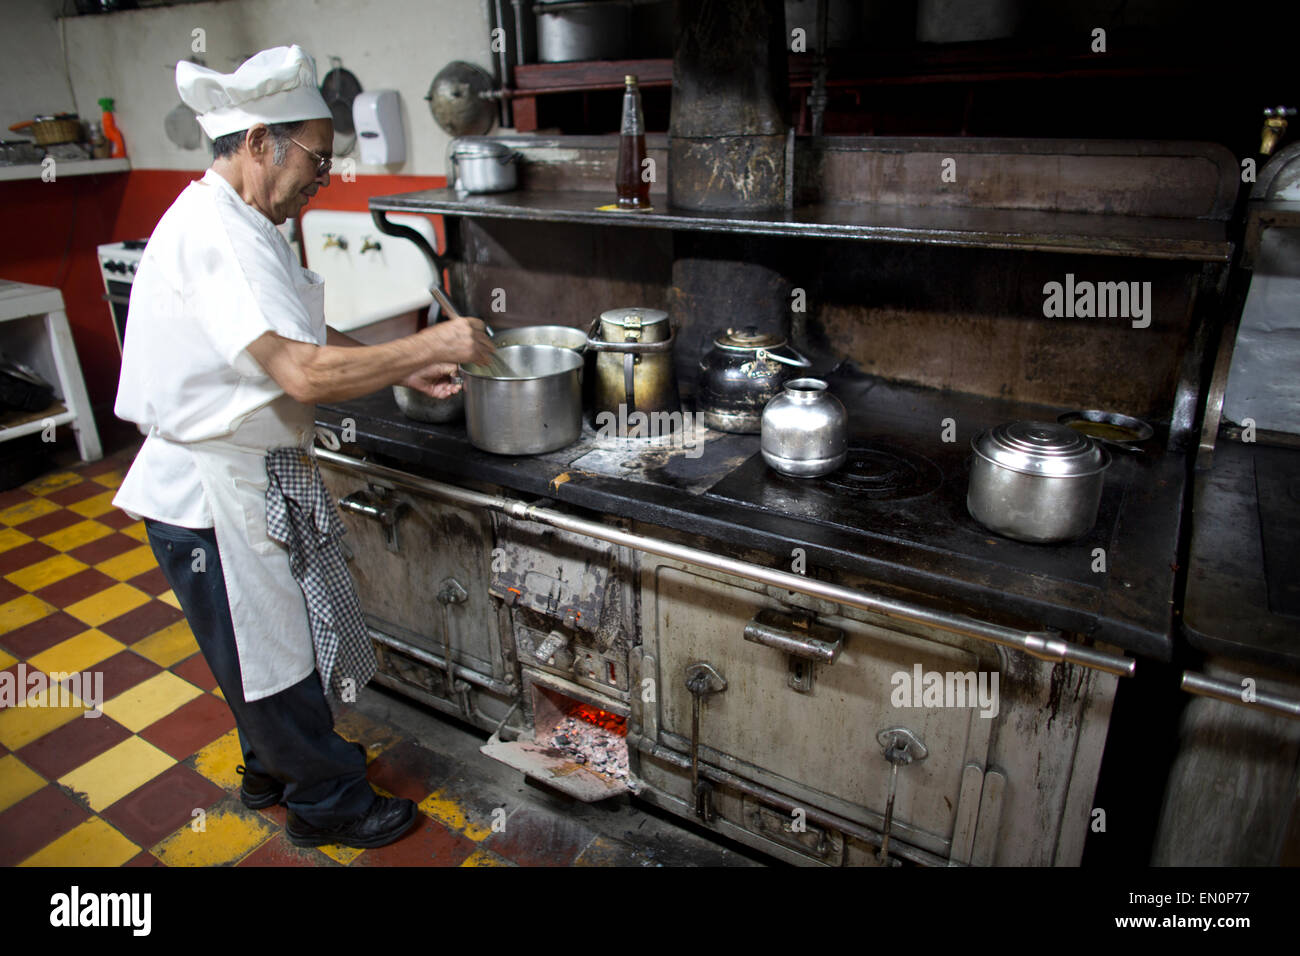 cook at work in Guatemala city market Stock Photo